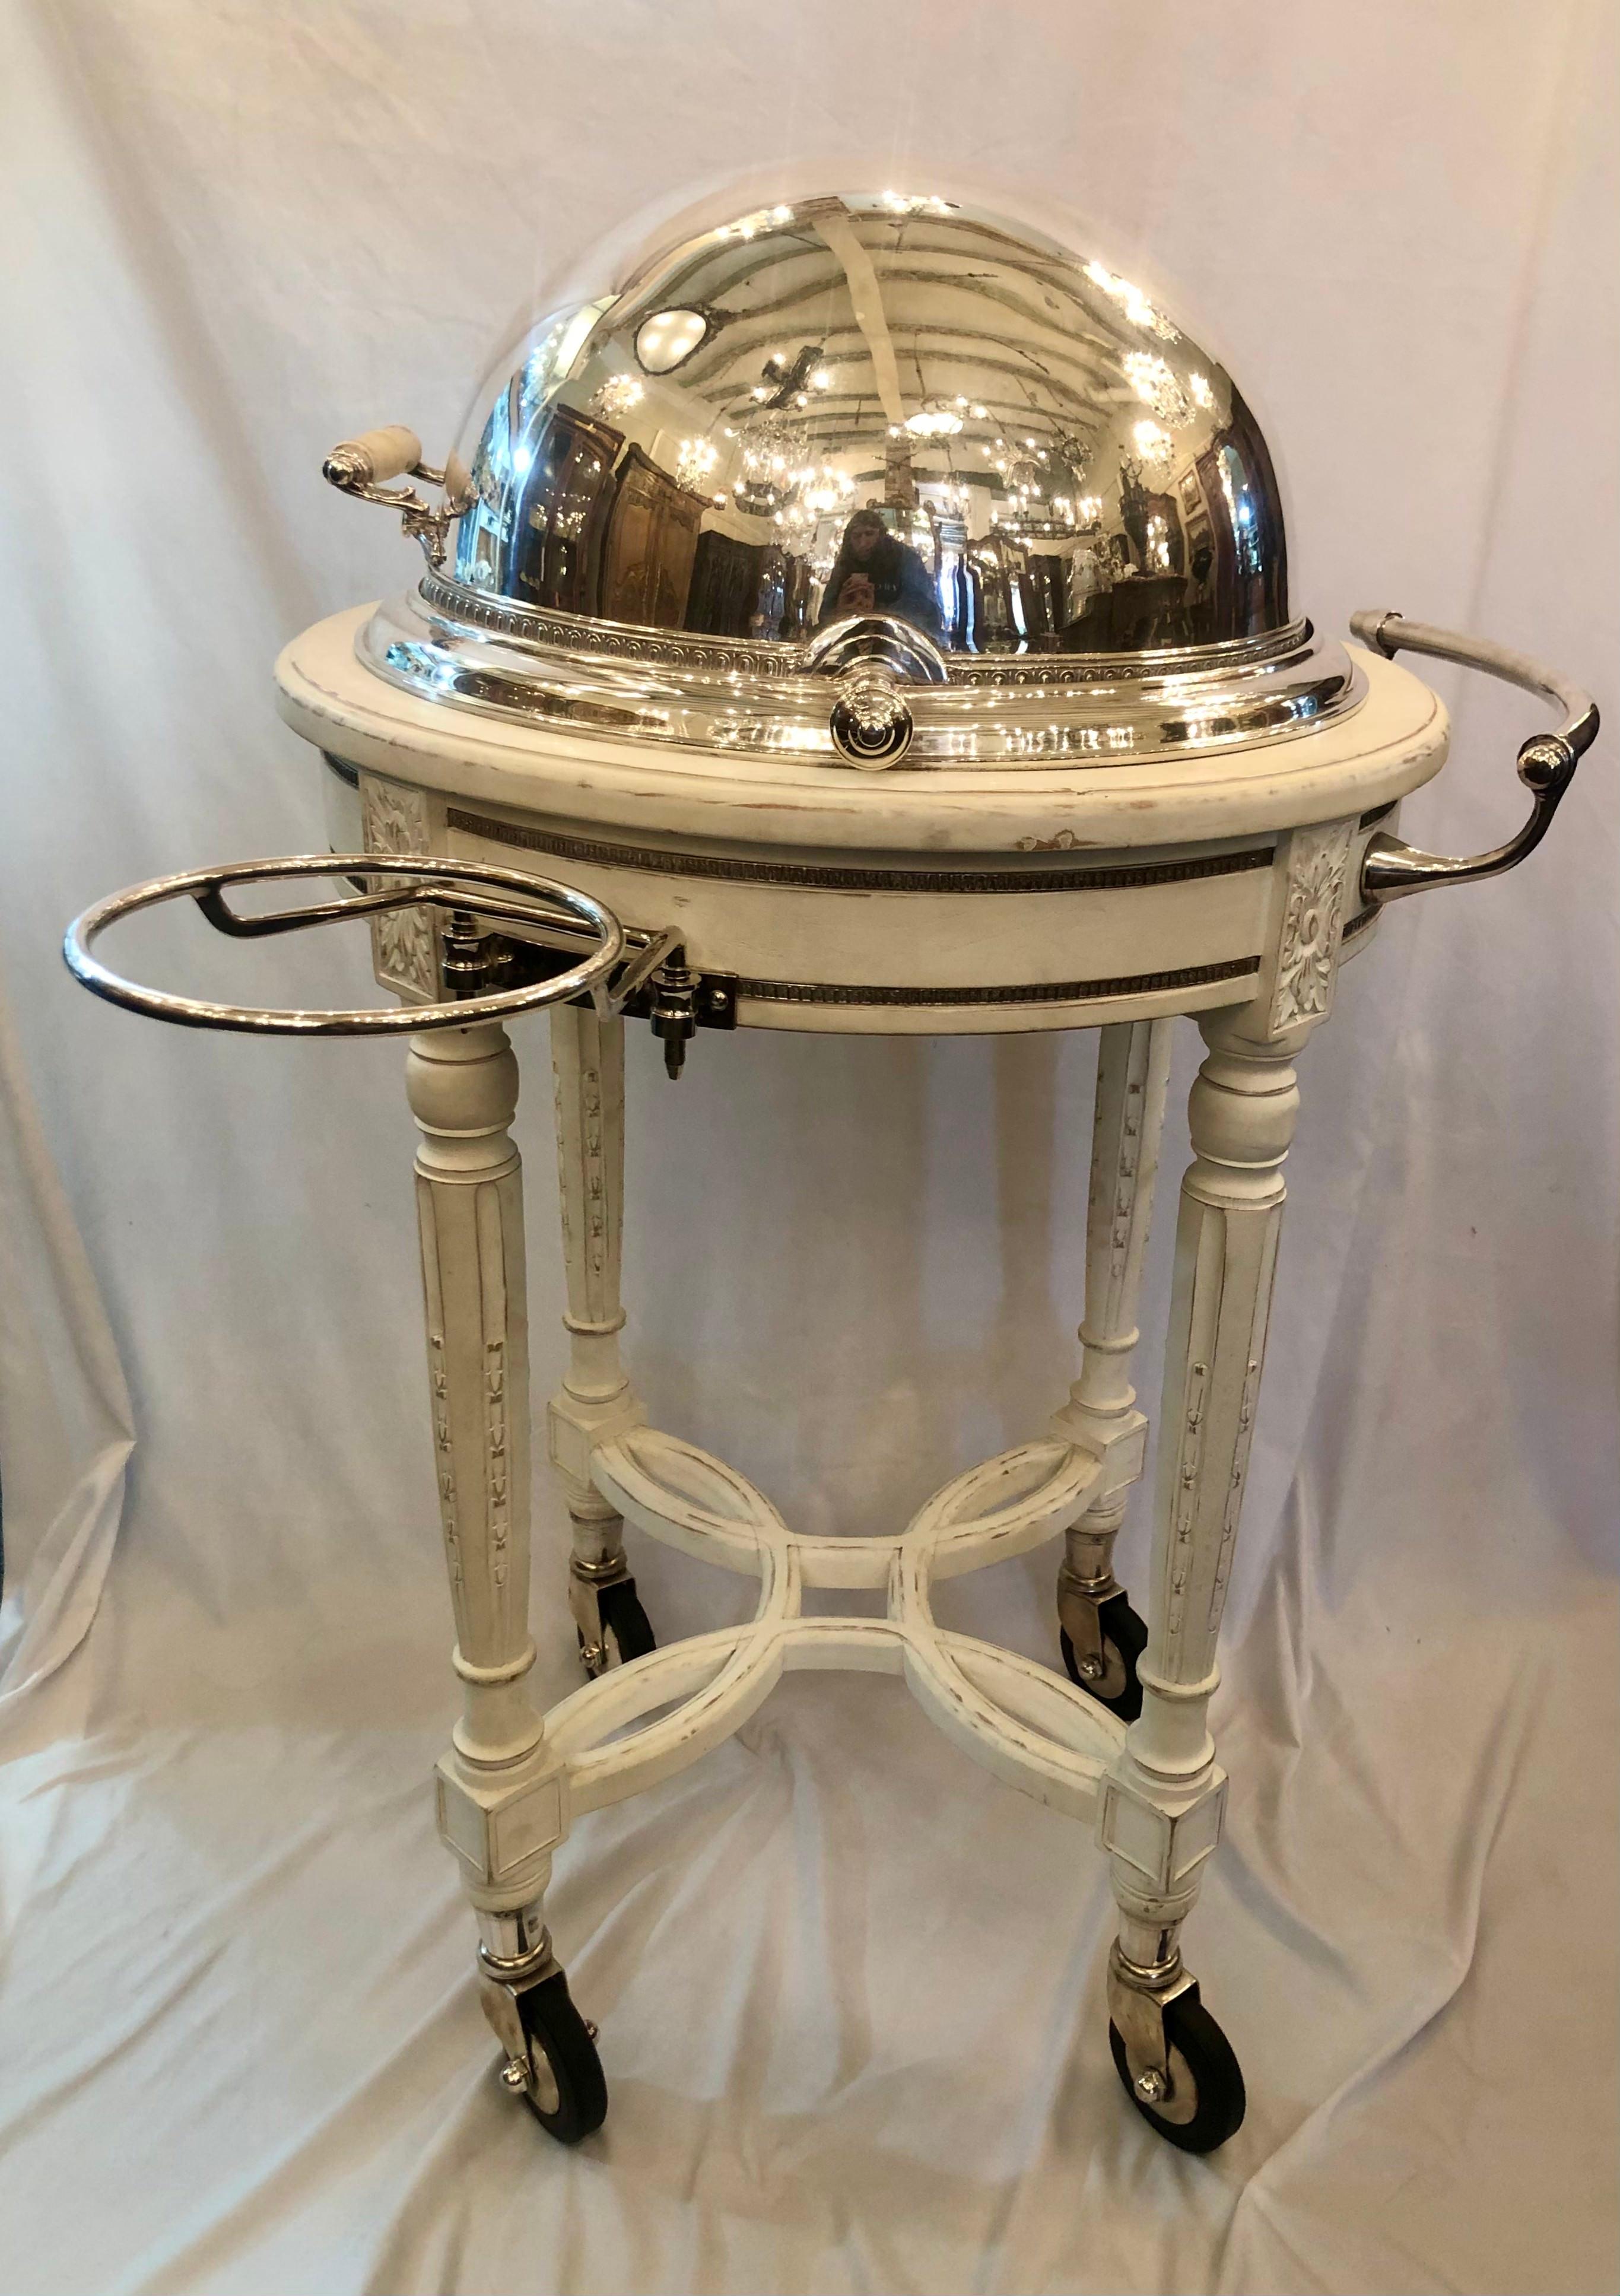 Late 20th Century Estate Handmade Silver-Plated Meat Carving Trolley Cart with Alcohol Burner